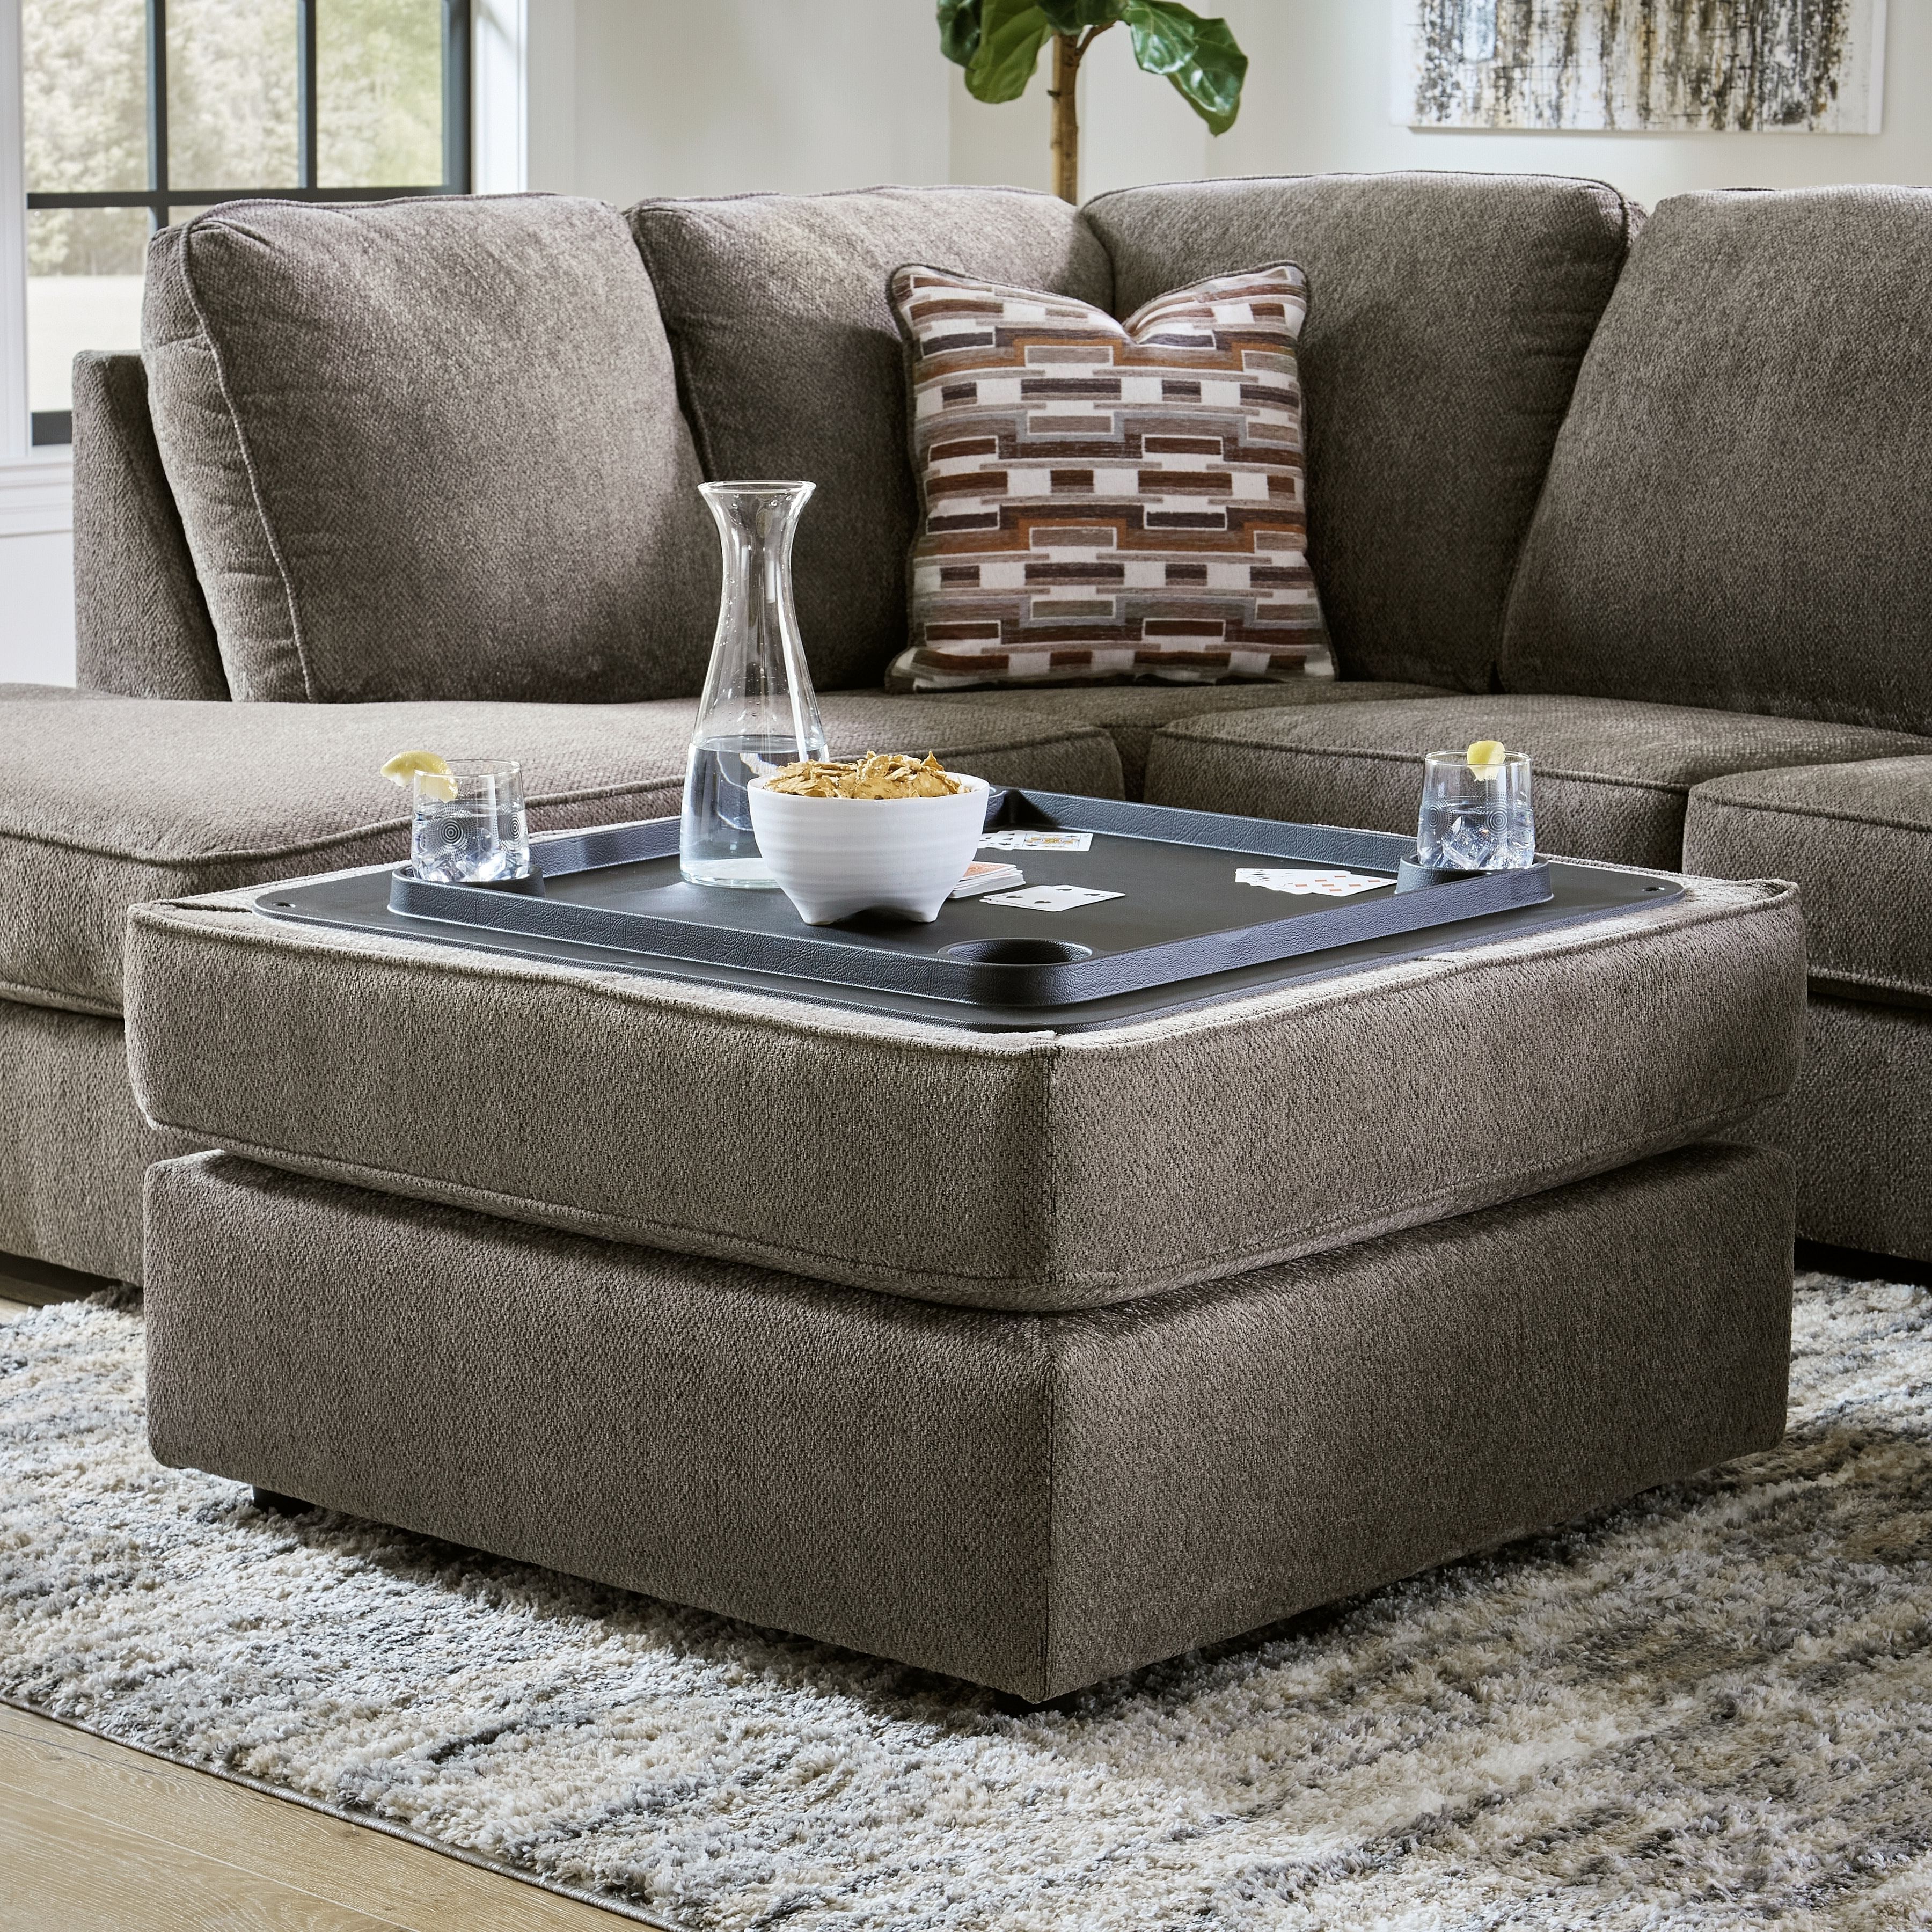 Living Room Ottomans Ashley Living Room O'phannon Ottoman With Storage  2940211 At Istyle Furniture Store With Sofa Set With Storage Tray Ottoman (View 10 of 20)